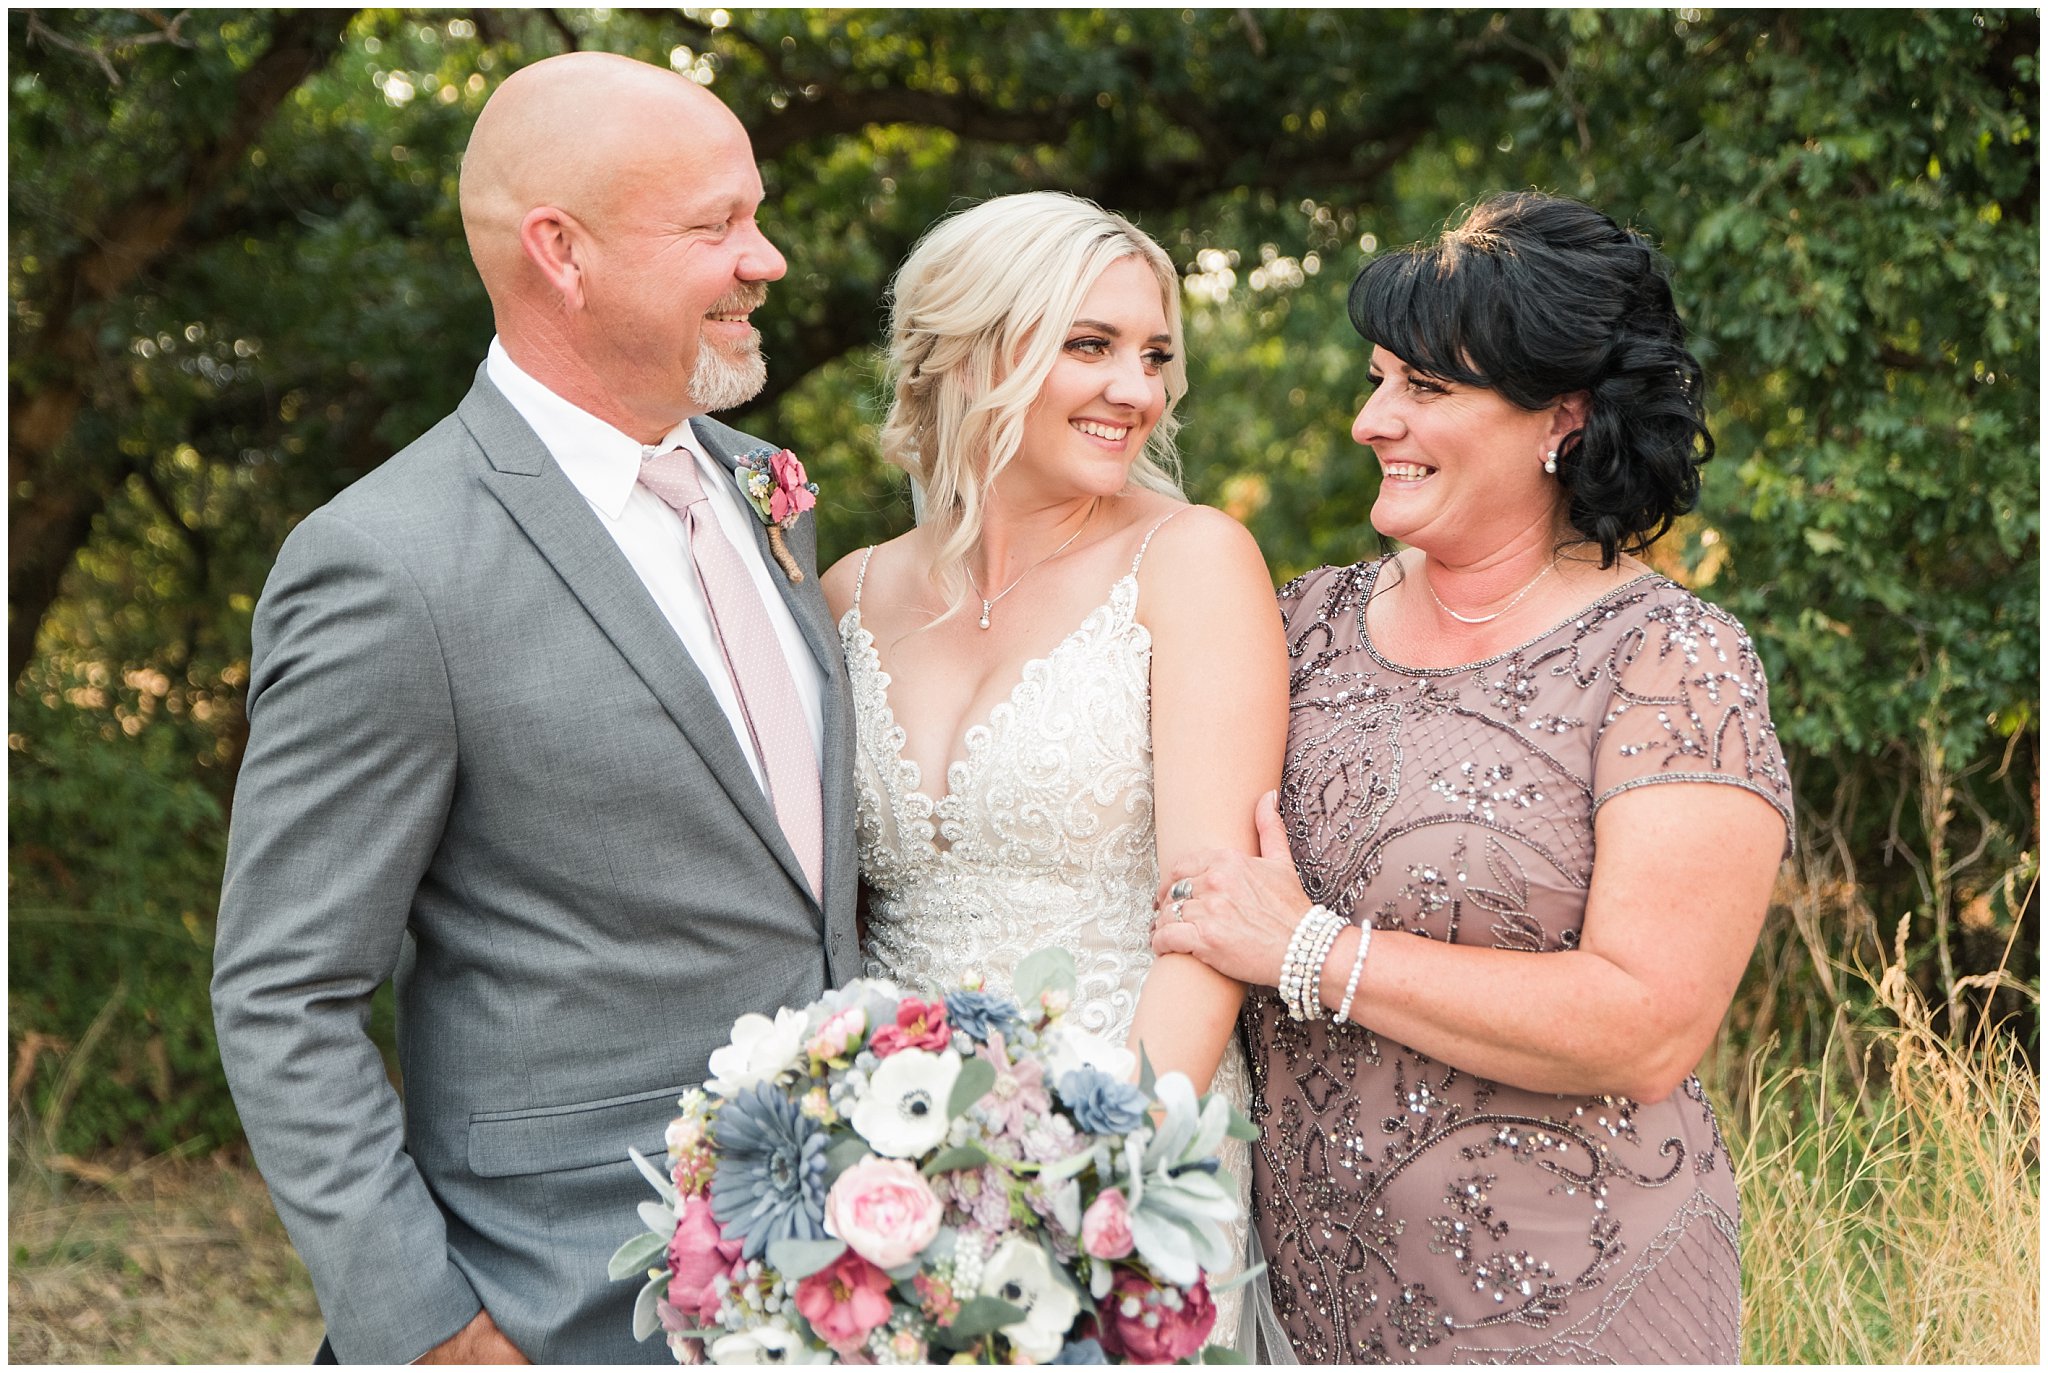 Family Photos | Dusty Blue and Rose Summer Wedding at Oak Hills Utah | Jessie and Dallin Photography